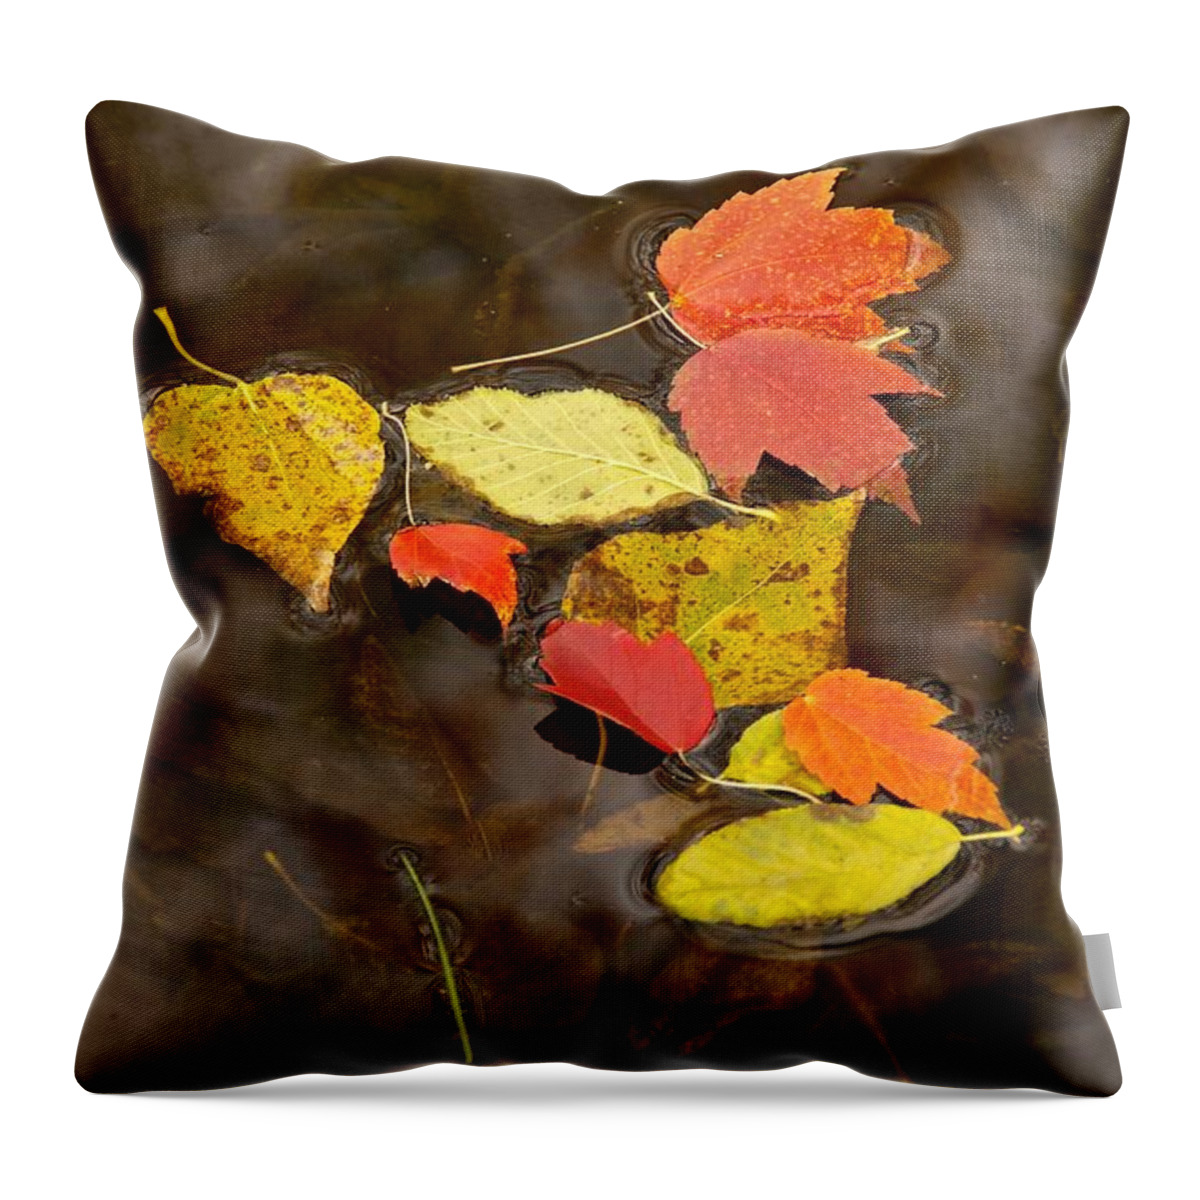 Photography Throw Pillow featuring the photograph Leaf Study 3 by Sean Griffin